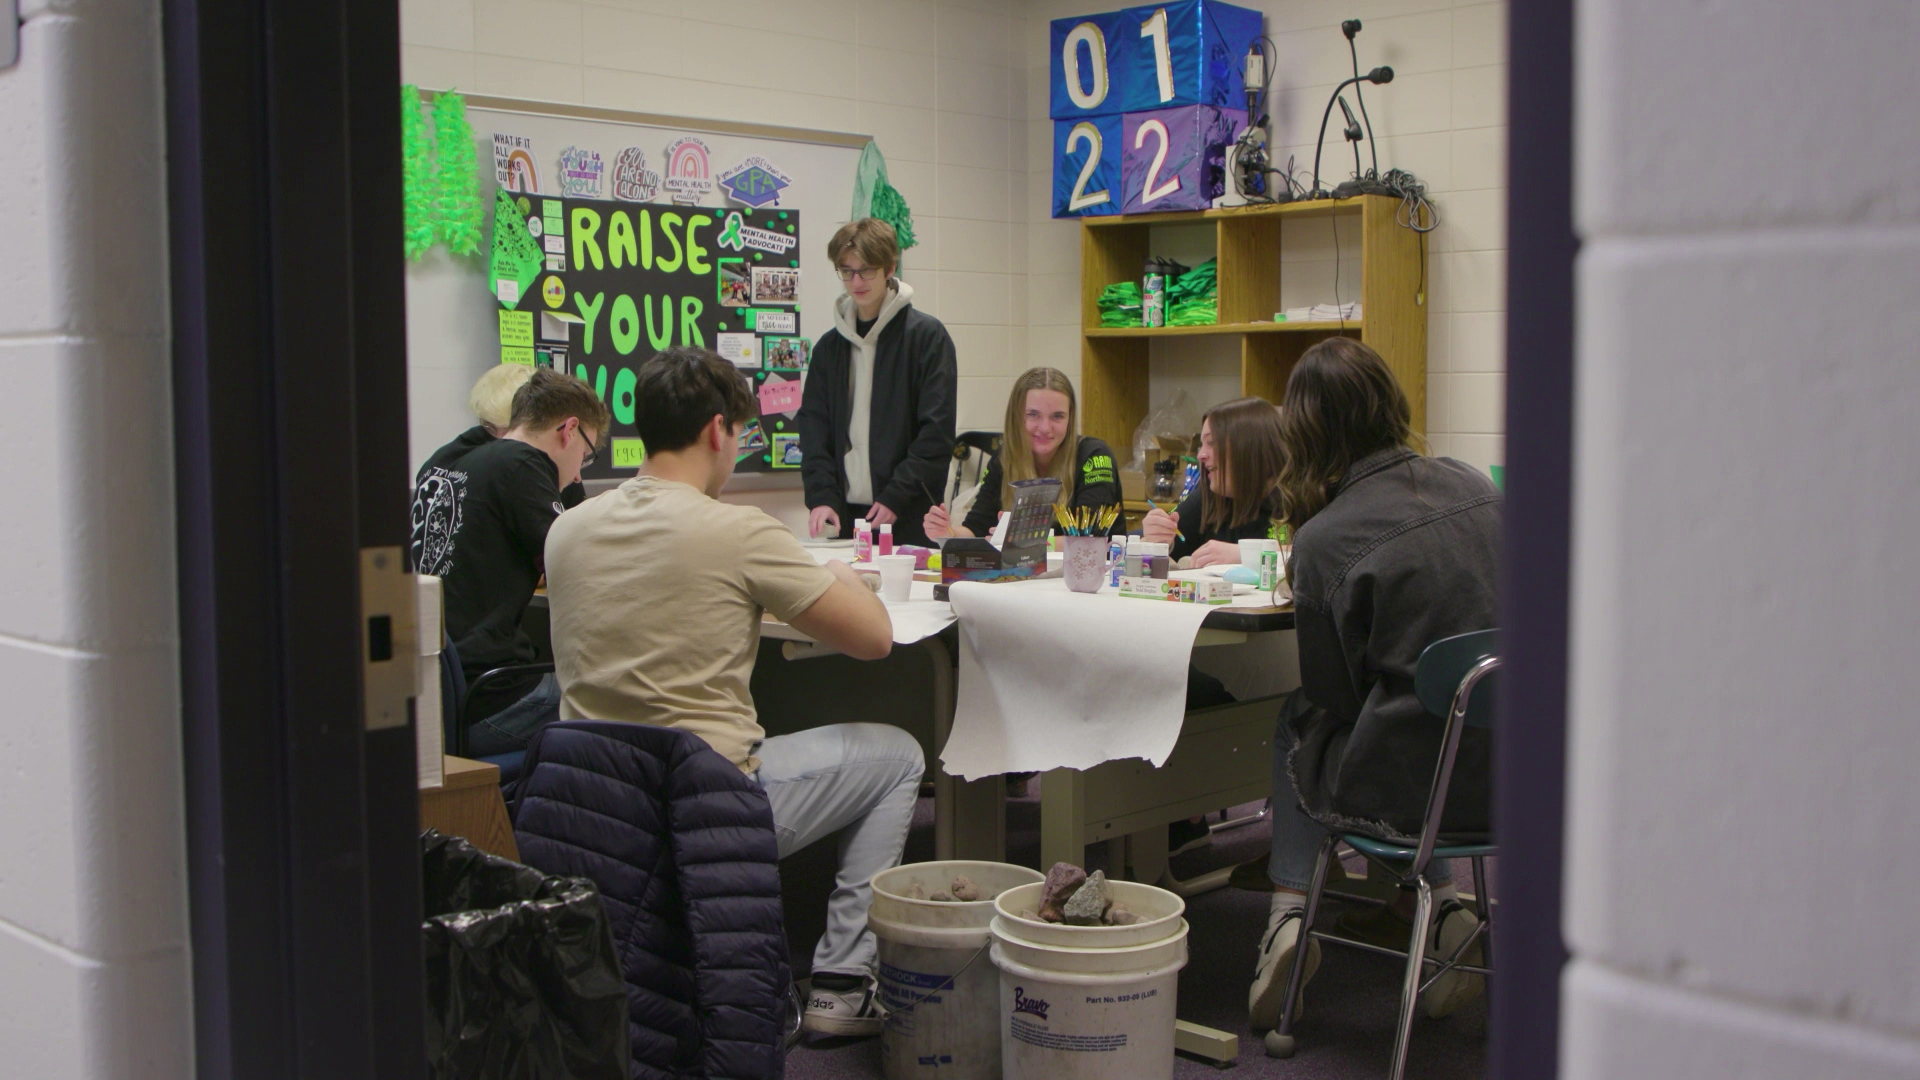 Multiple students sit around a table and work on a painting project in a room with painted concrete-block walls, shelves, a whiteboard and collage-style poster with the words "Raise Your Voice."